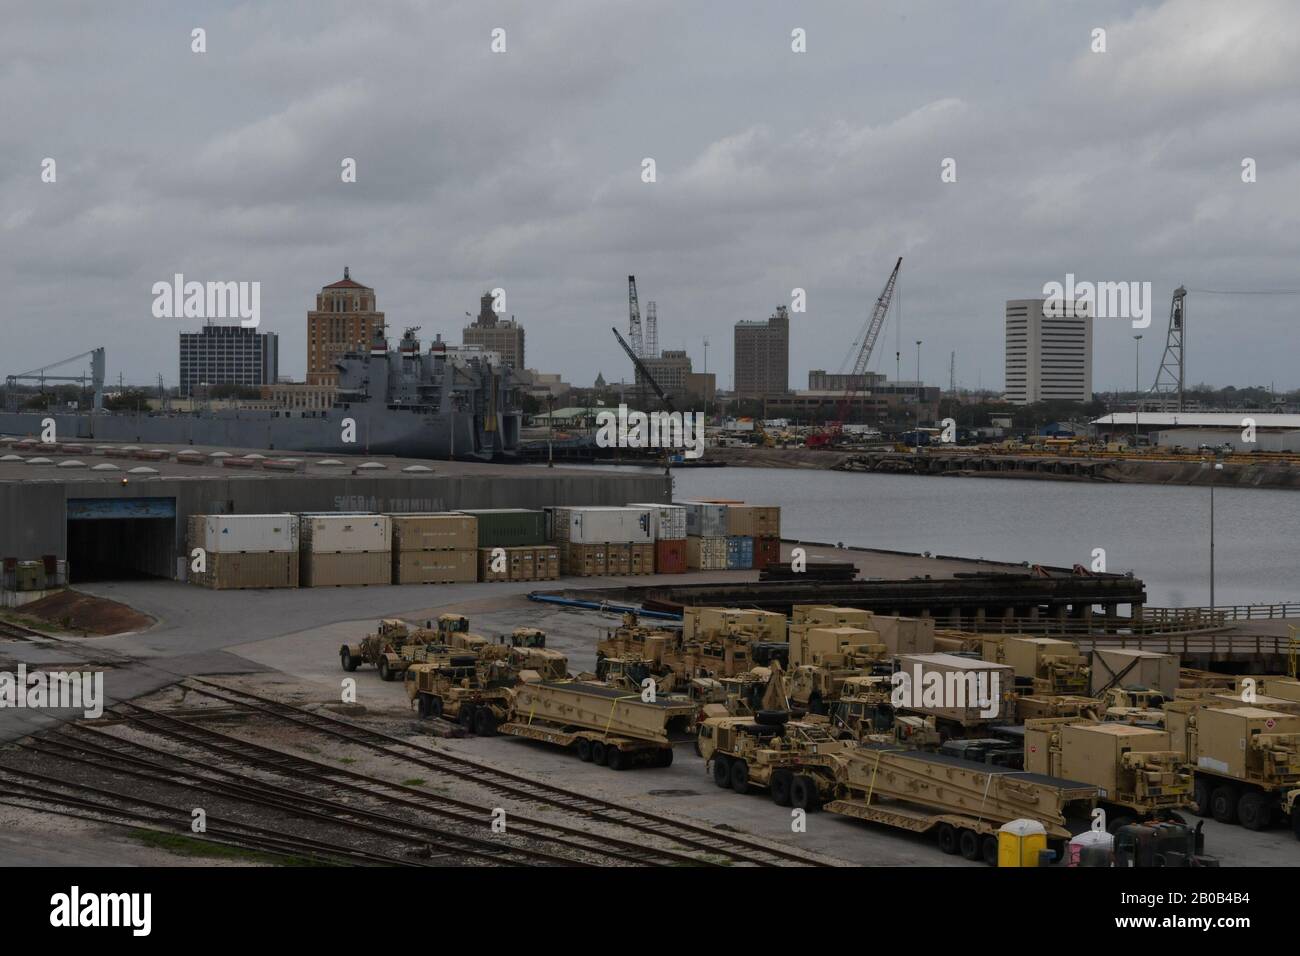 Containers and vehicles await transportation on commercial ships to Europe in support of DEFENDER-Europe 20 February 18, 2020 at the Port of Beaumont, Texas. DEFENDER Europe 20 will exercise the deployment of a division-size combat-credible force from the United States to Europe, the drawing of equipment and the movement of personnel and equipment across the theater to various training areas. U.S. Army photo/Kimberly Spinner) Stock Photo